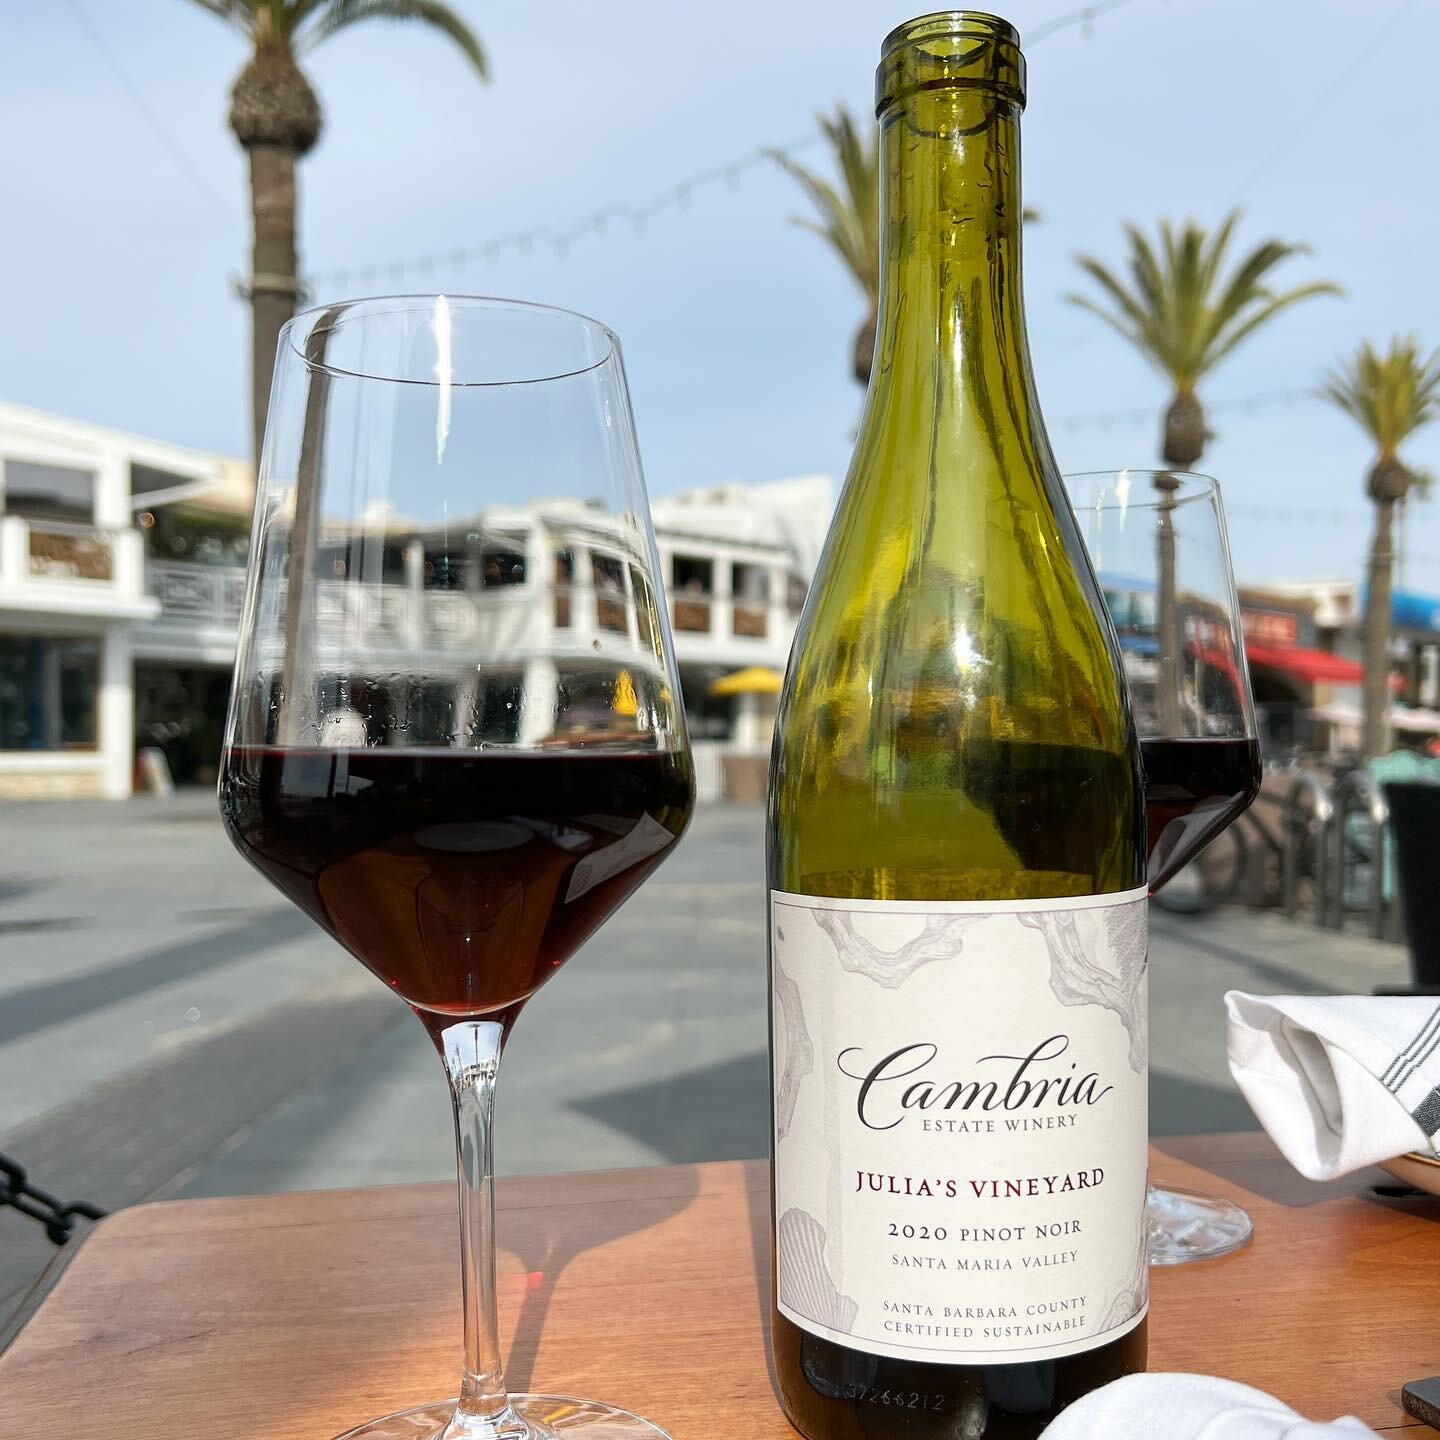 Wine Stories Ep.1 🤓

One of the most refreshing Pinot Noir you will find on the #hermosabeachpier. Julia&rsquo;s Vineyard from @cambriawines is a woman made, run, and owned estate winery. This Pinot features subtle notes of blackberry, pomegranate, 